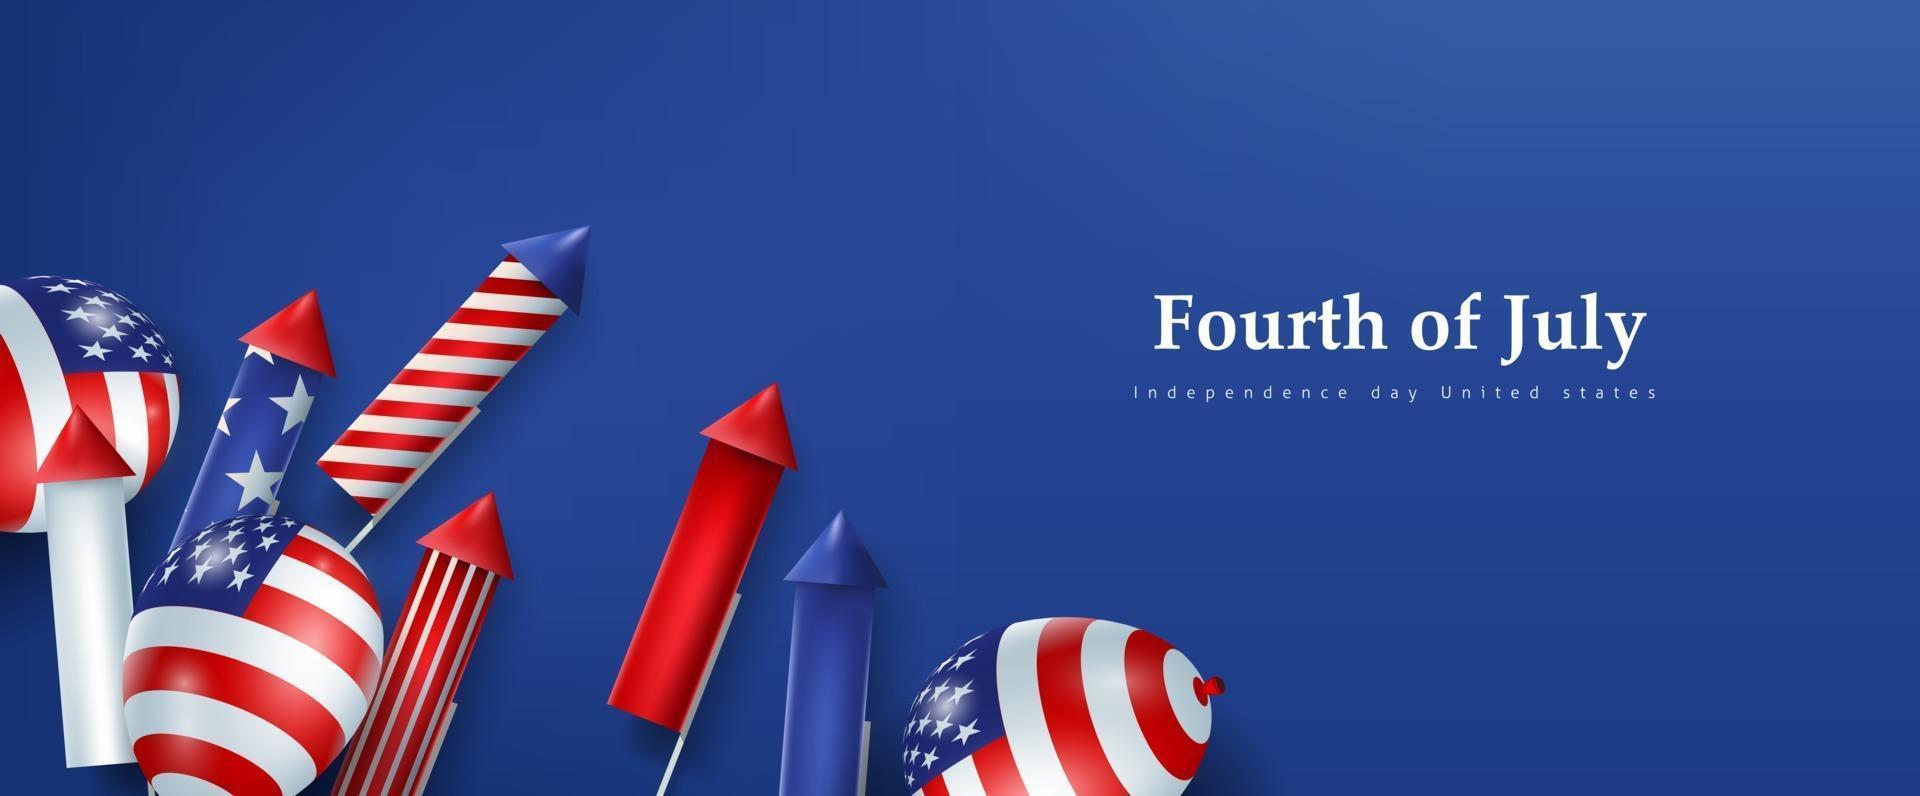 Independence day USA banner template rockets for fireworks and balloons background vector